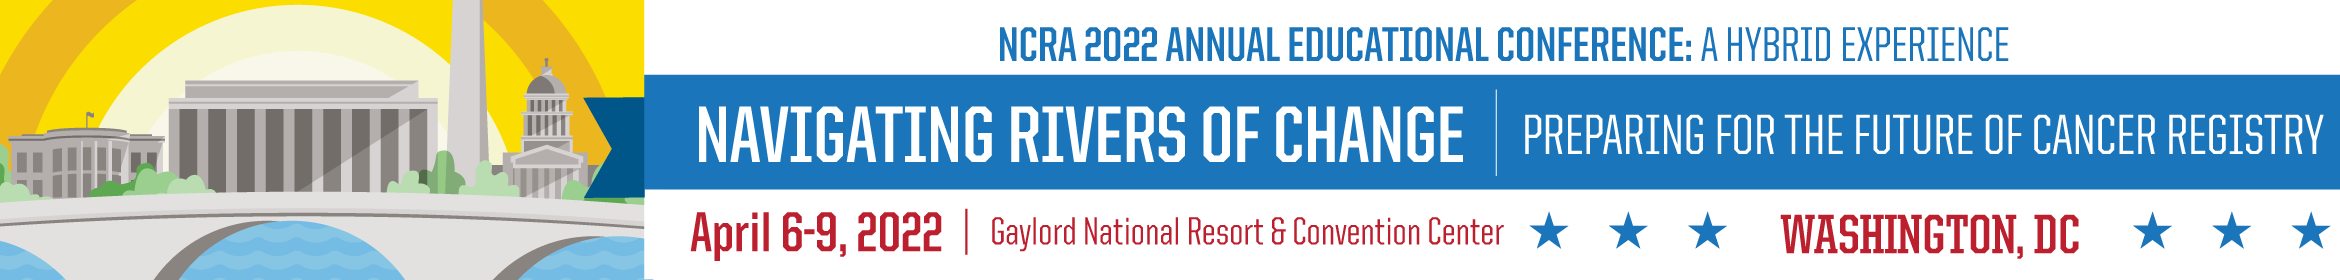 NCRA Annual Hybrid Educational Conference 2022 Main banner